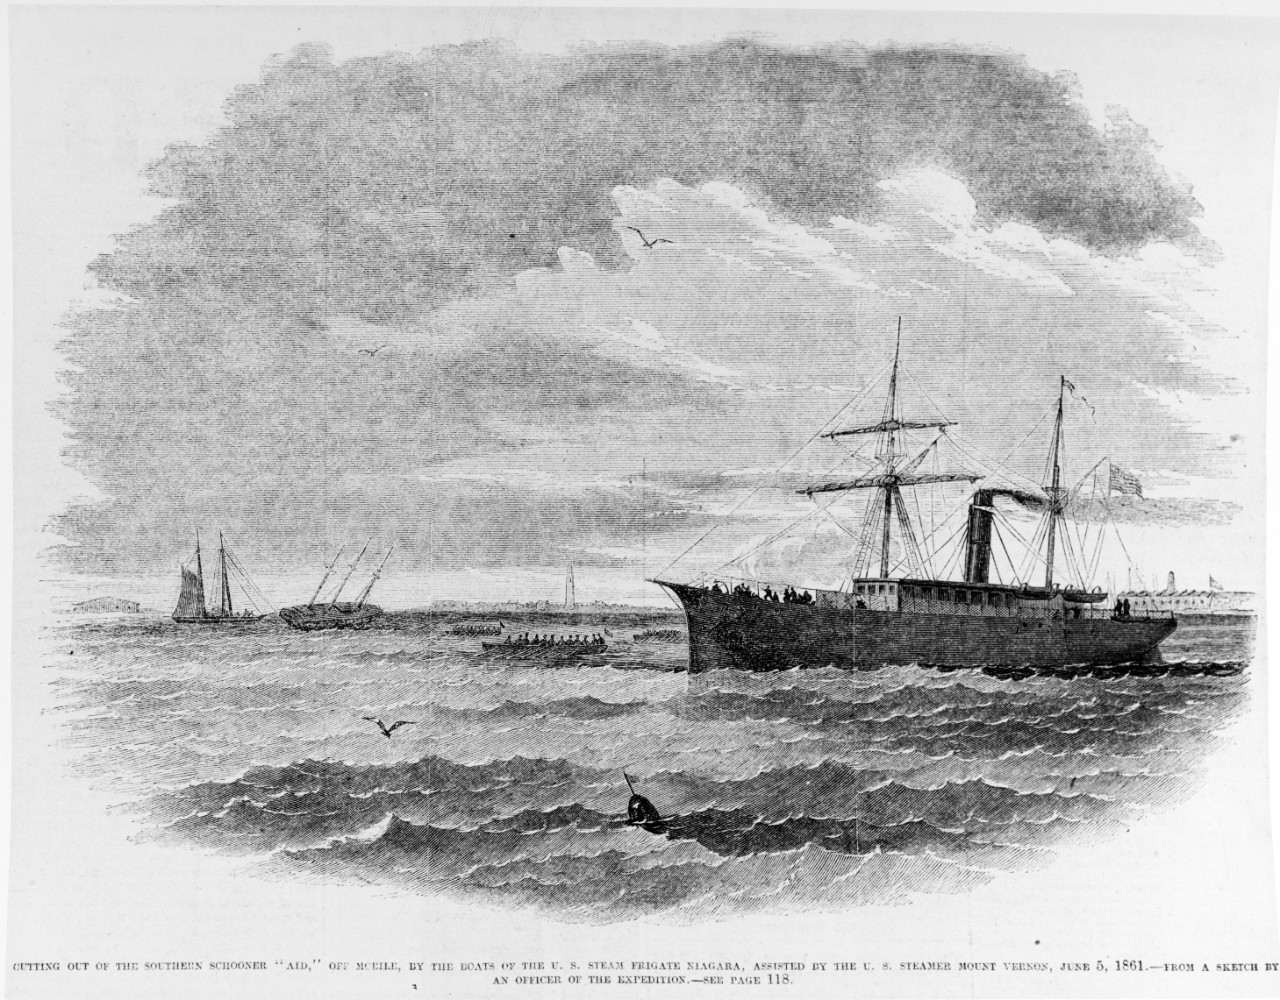 Photo #: NH 59145  &quot;Cutting Out of the Southern Schooner 'Aid,' off Mobile, by the Boats of the U.S. Steam Frigate Niagara, assisted by the U.S. Steamer Mount Vernon, June 5, 1861.&quot;